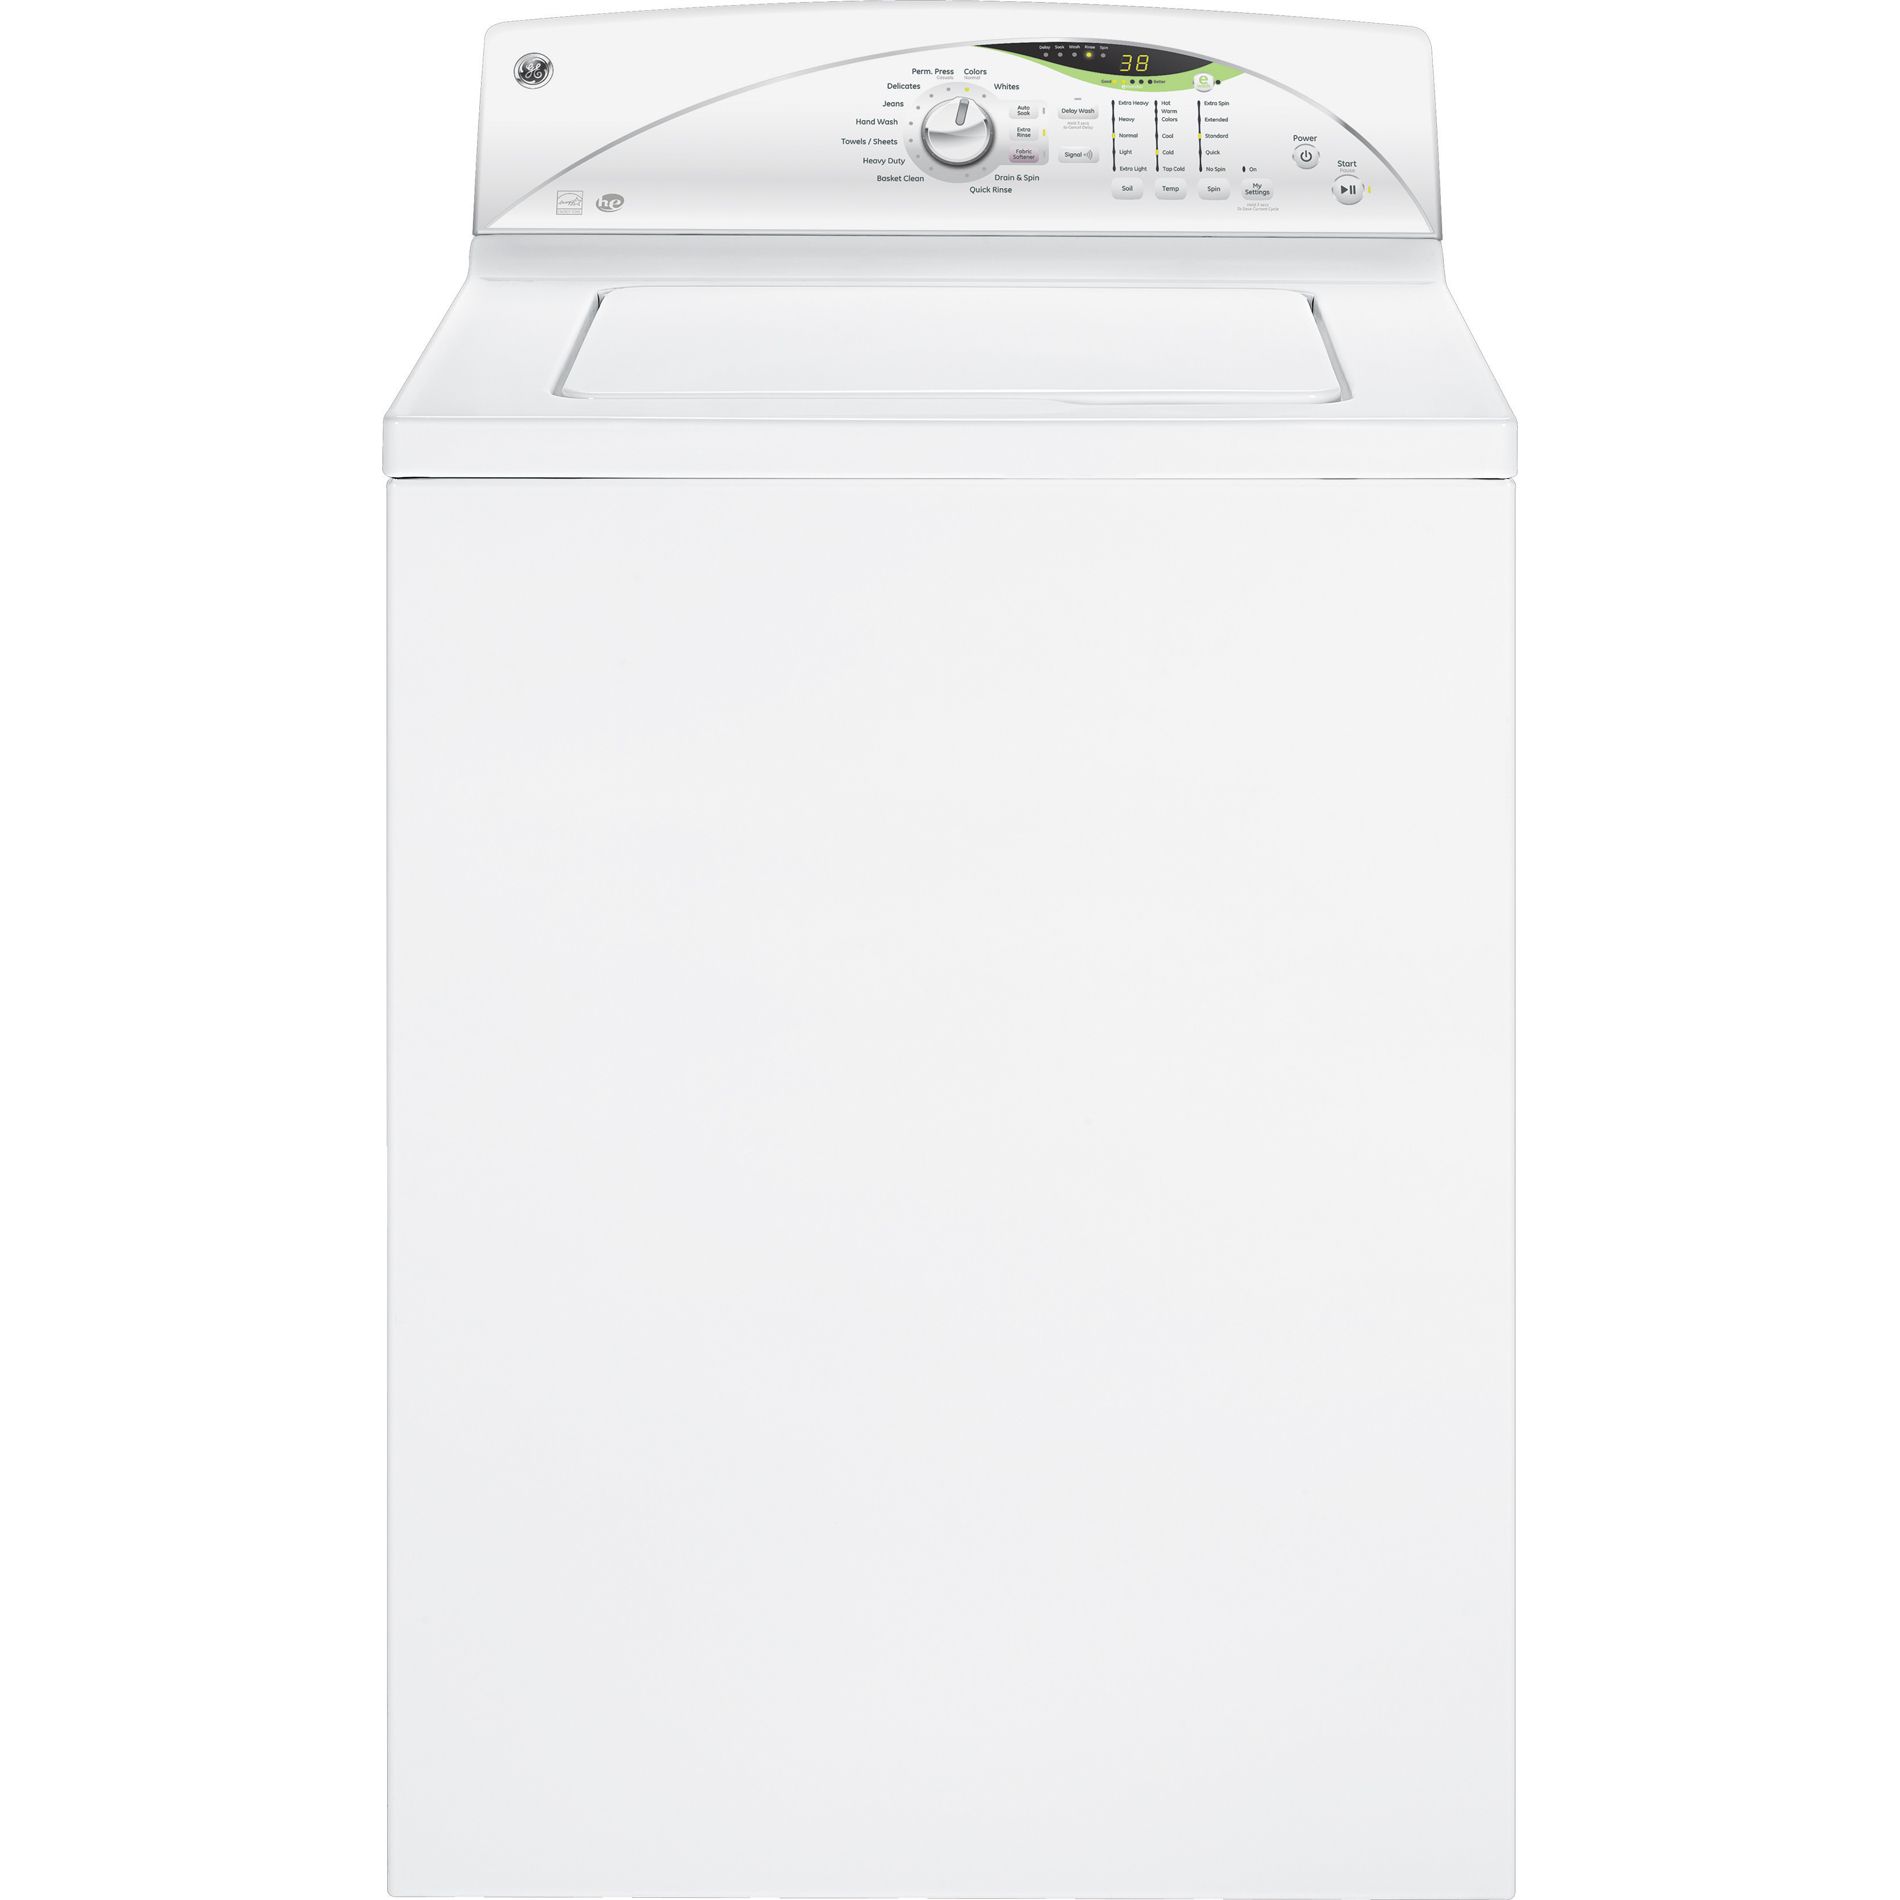 GE 4.0 cu. ft. High-Efficiency Top Load Washer - White 4.0 cu.ft. - 4.5 cu.ft.